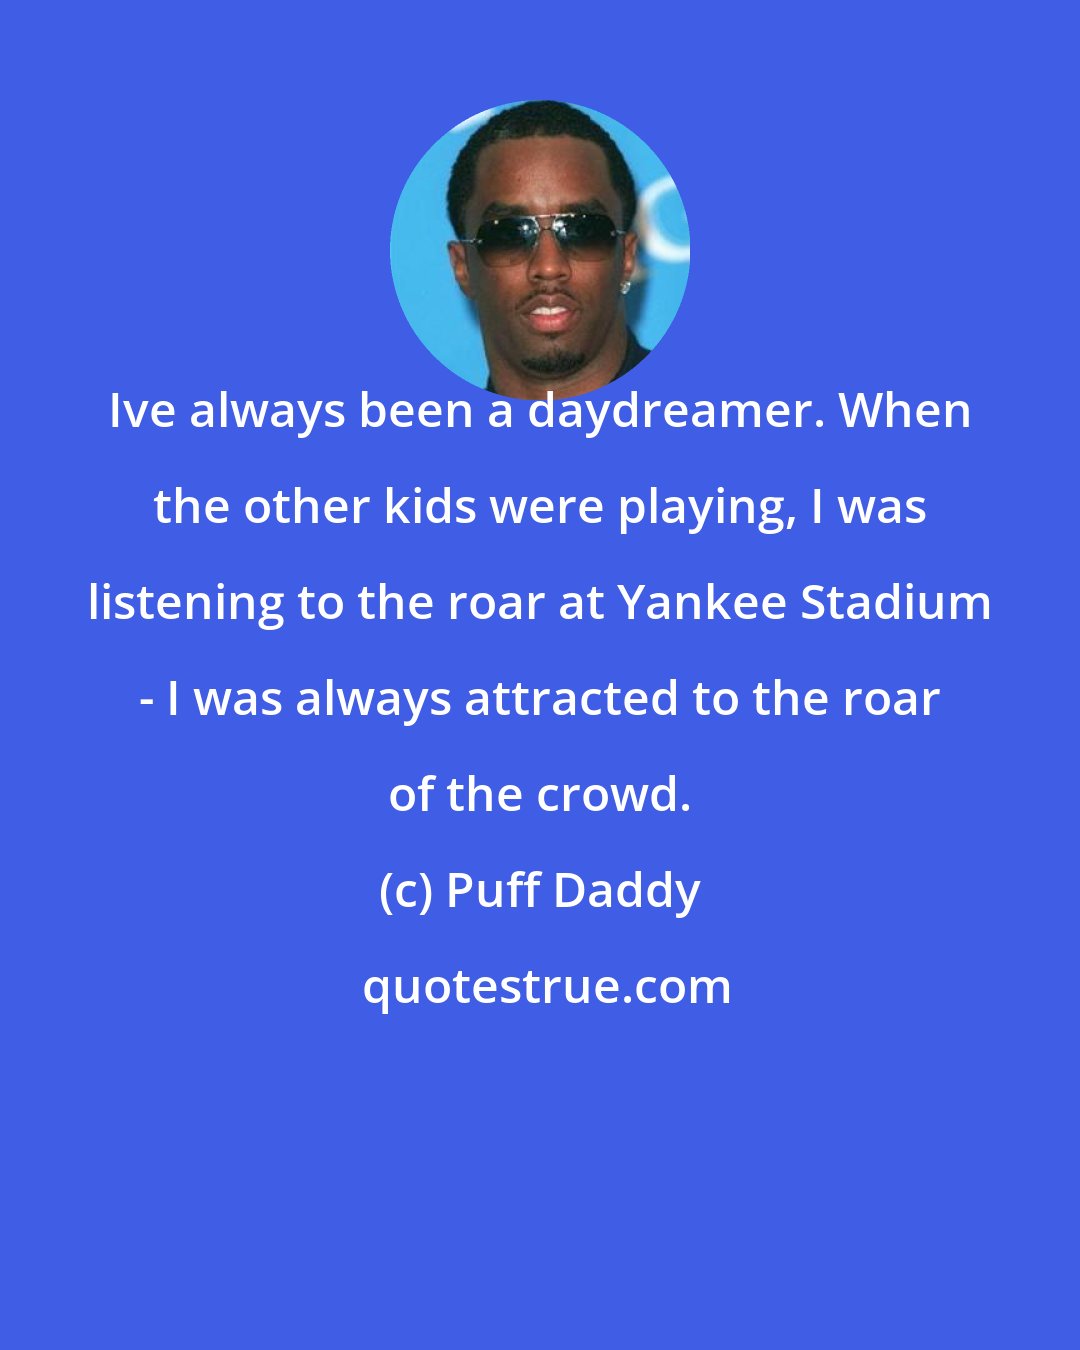 Puff Daddy: Ive always been a daydreamer. When the other kids were playing, I was listening to the roar at Yankee Stadium - I was always attracted to the roar of the crowd.